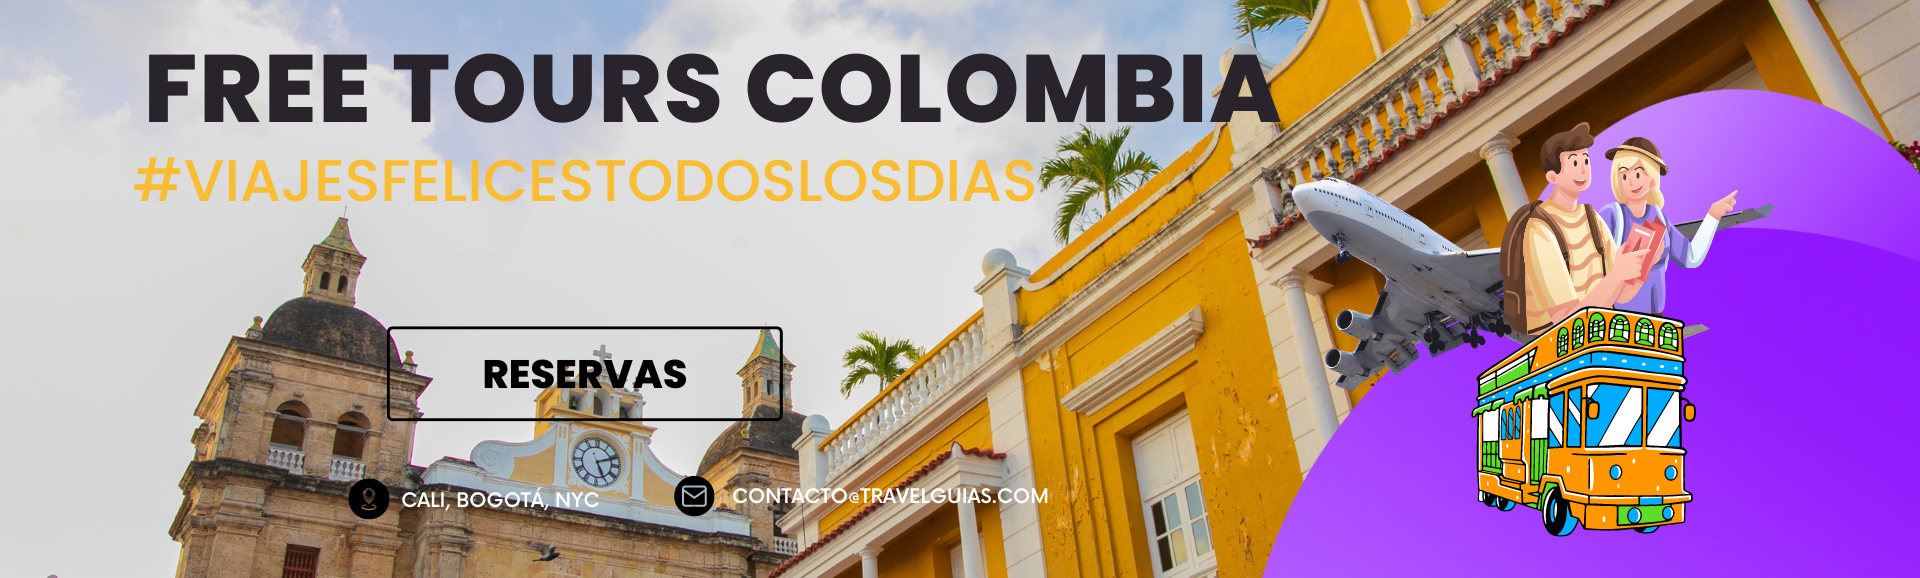 FREE TOURS COLOMBIA